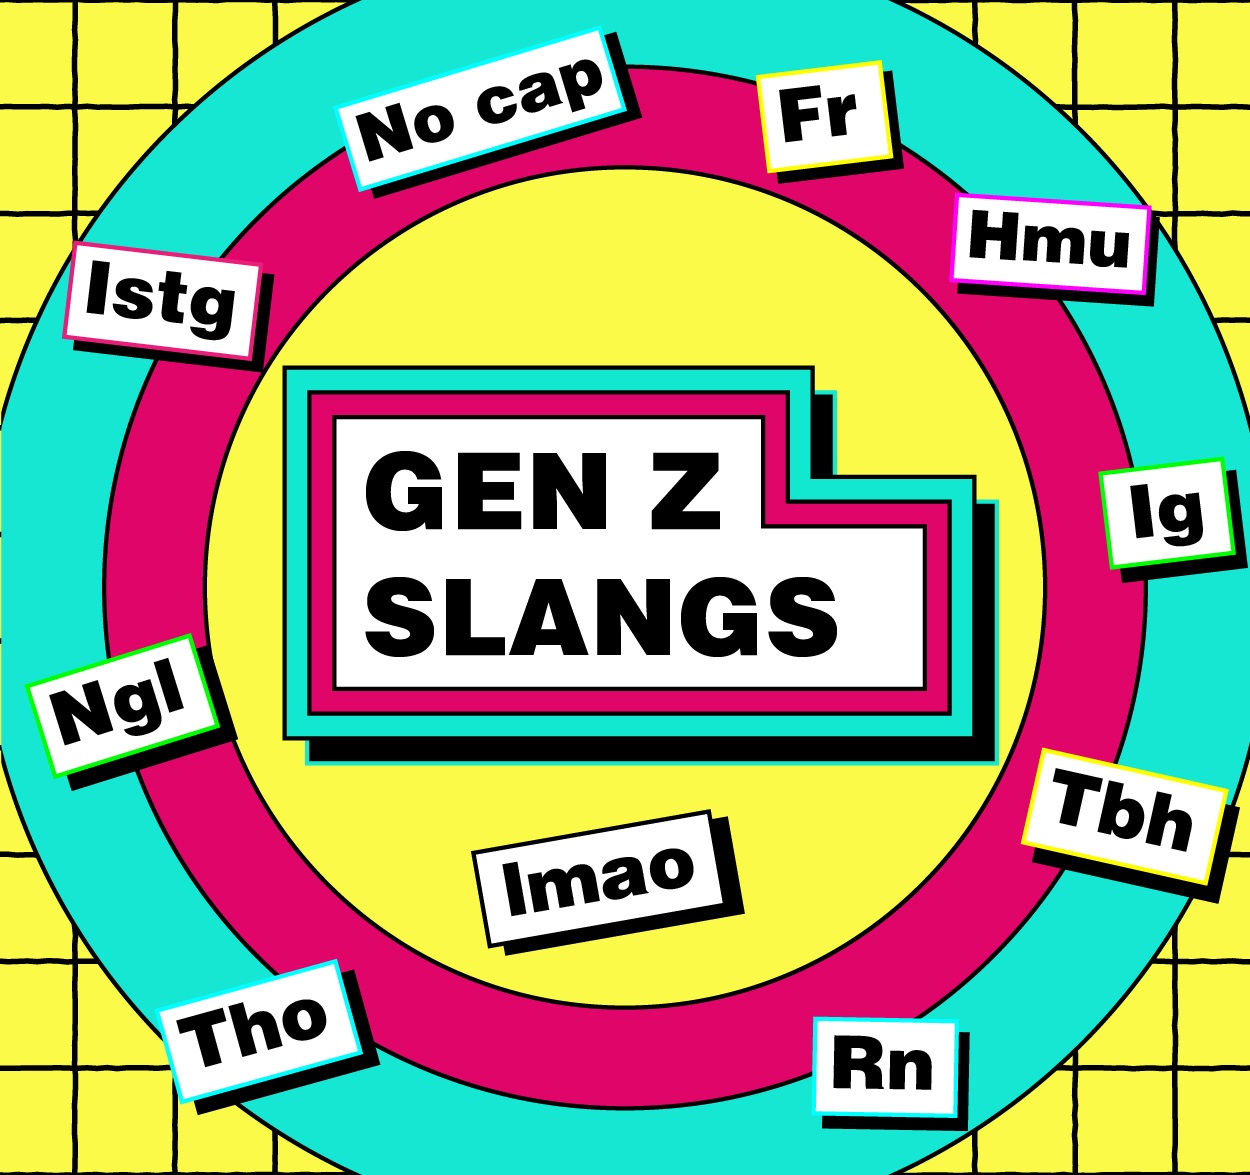 10 Gen Z Slangs That Filipinos Love to Use Incorrectly Like Fr, Ngl